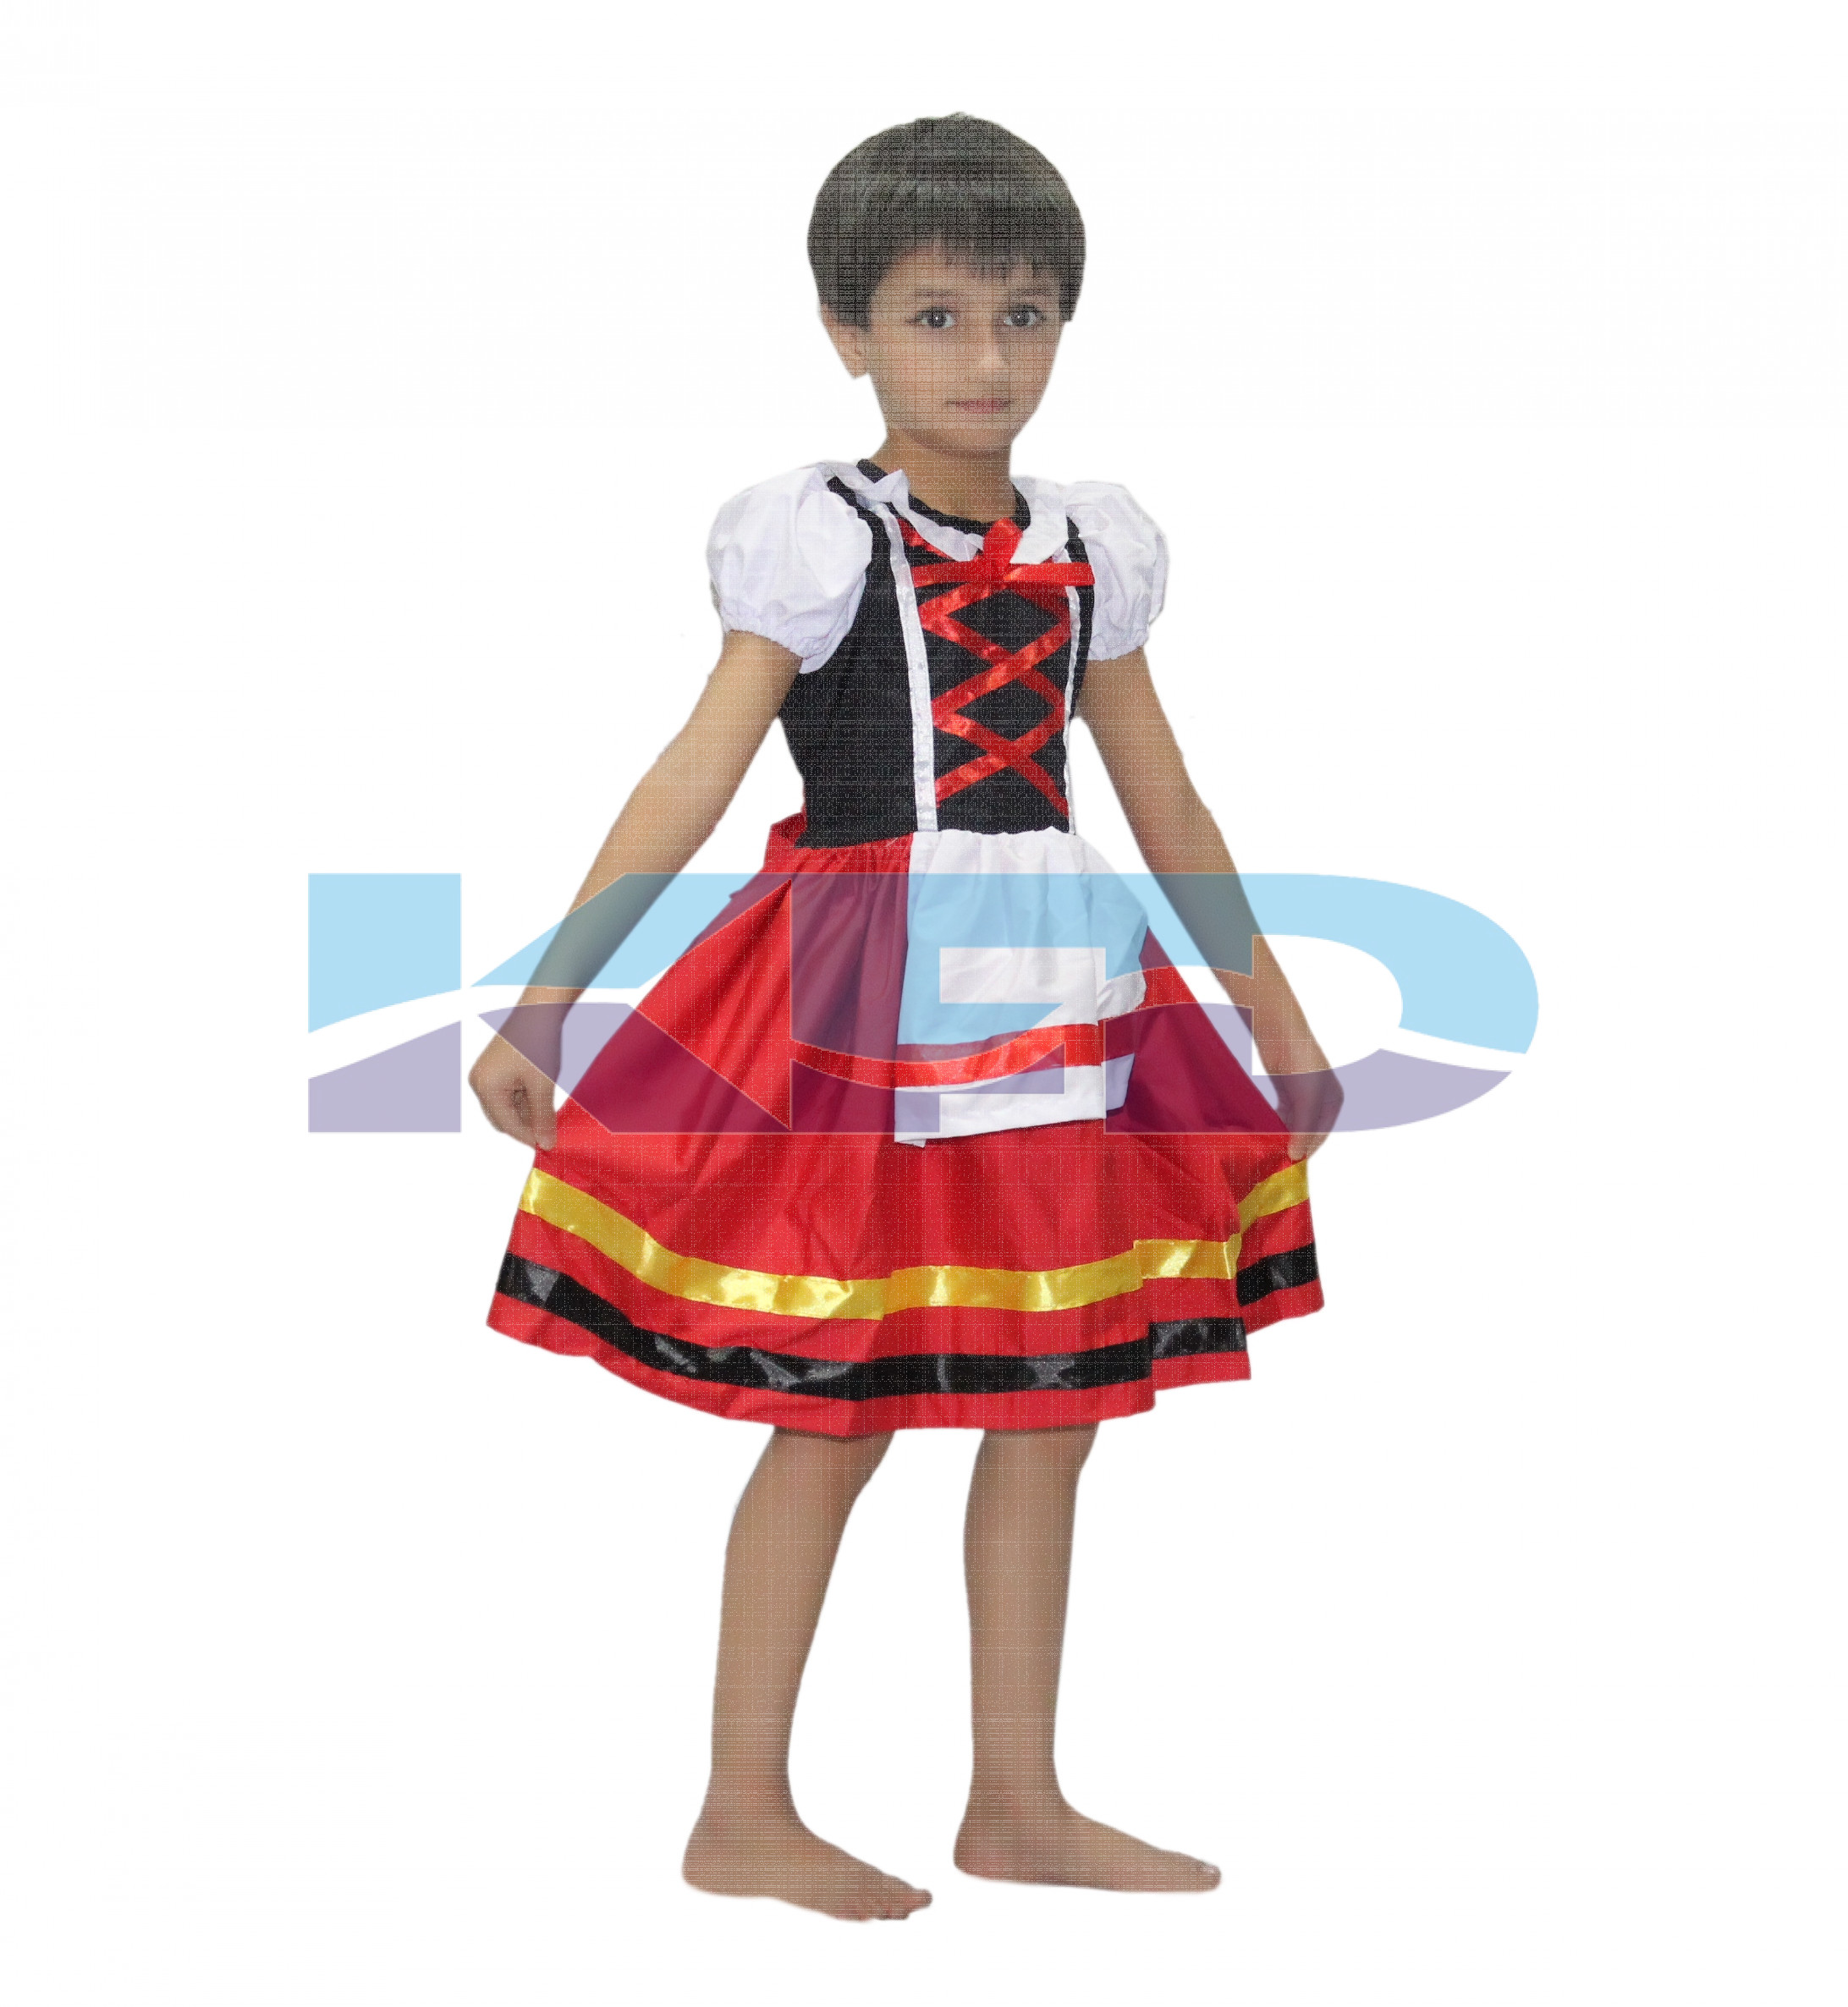 German Girl Costume For Kids/Oktoberfest Beer Costume For Kids/Cosplay Costume for Girls/California Costume/Theme Party/Competition/Stage Shows/Birthday Party Dress